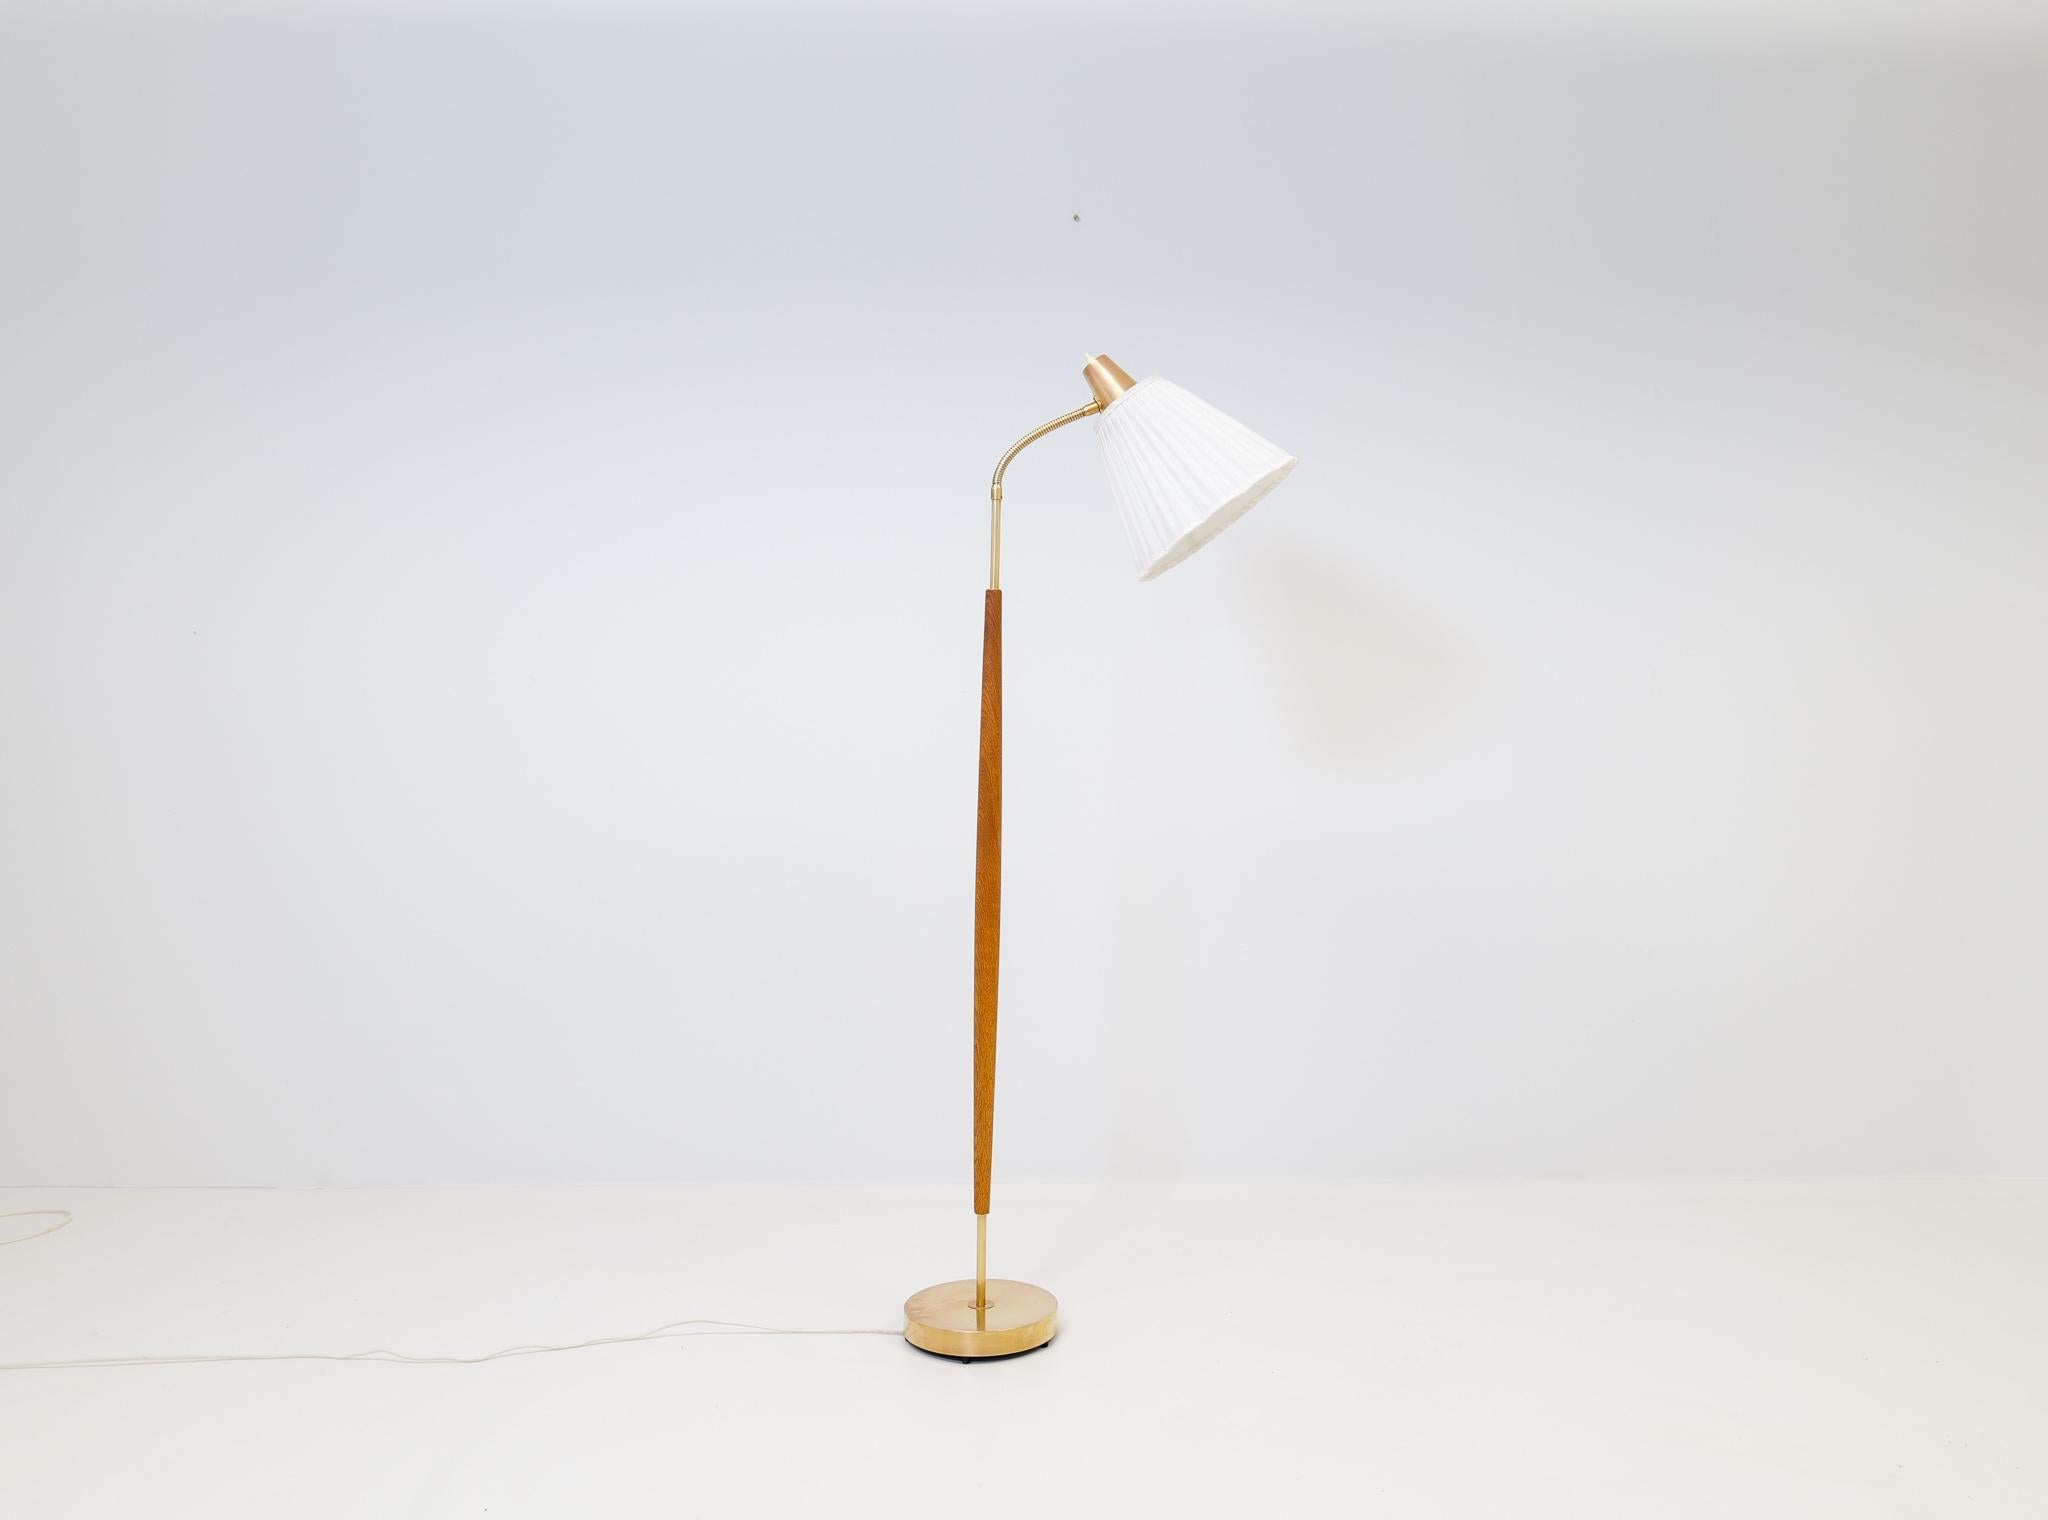 This lamp was made in Sweden at Falkenbergs Belysning. Wonderful, assembled brass combination with oak rod. The brass working well together with the sculptural and nicely grained oak. 

Good patinated brass, working condition. Old shade with some